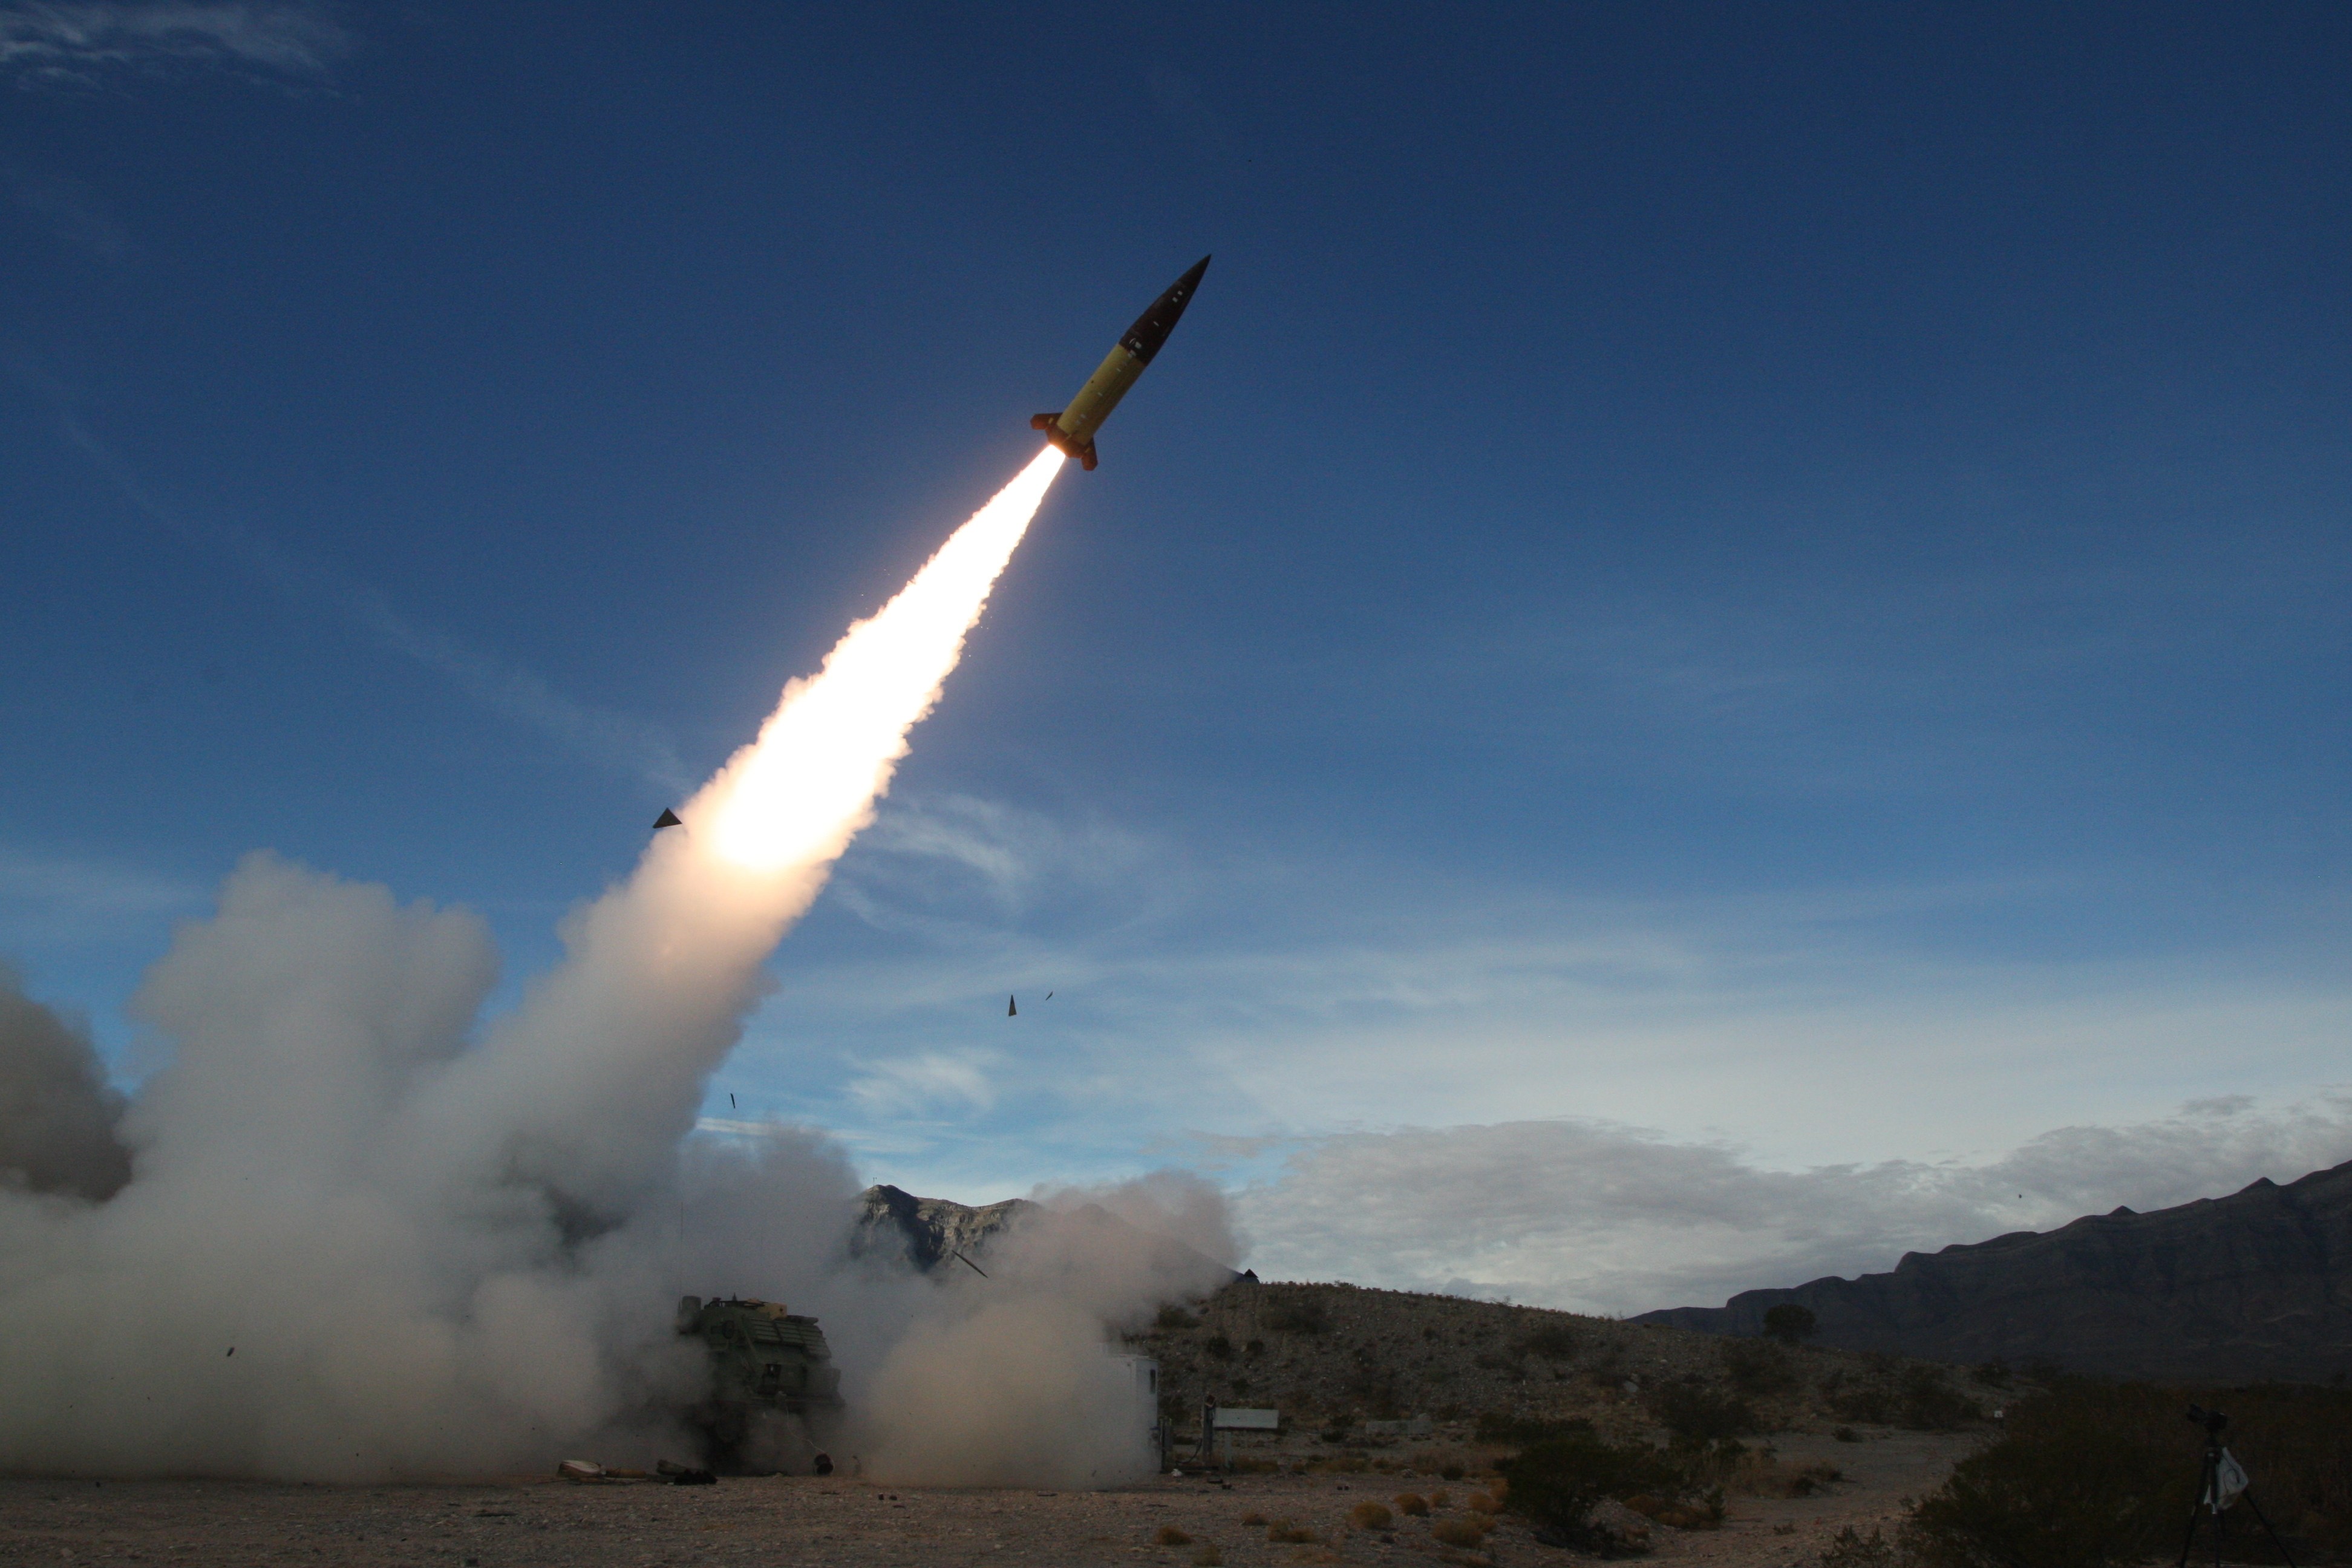 US Army soldiers conduct a test of the Army Tactical Missile System at White Sands Missile Range, New Mexico, in December 2021. Photo: US Army via AP